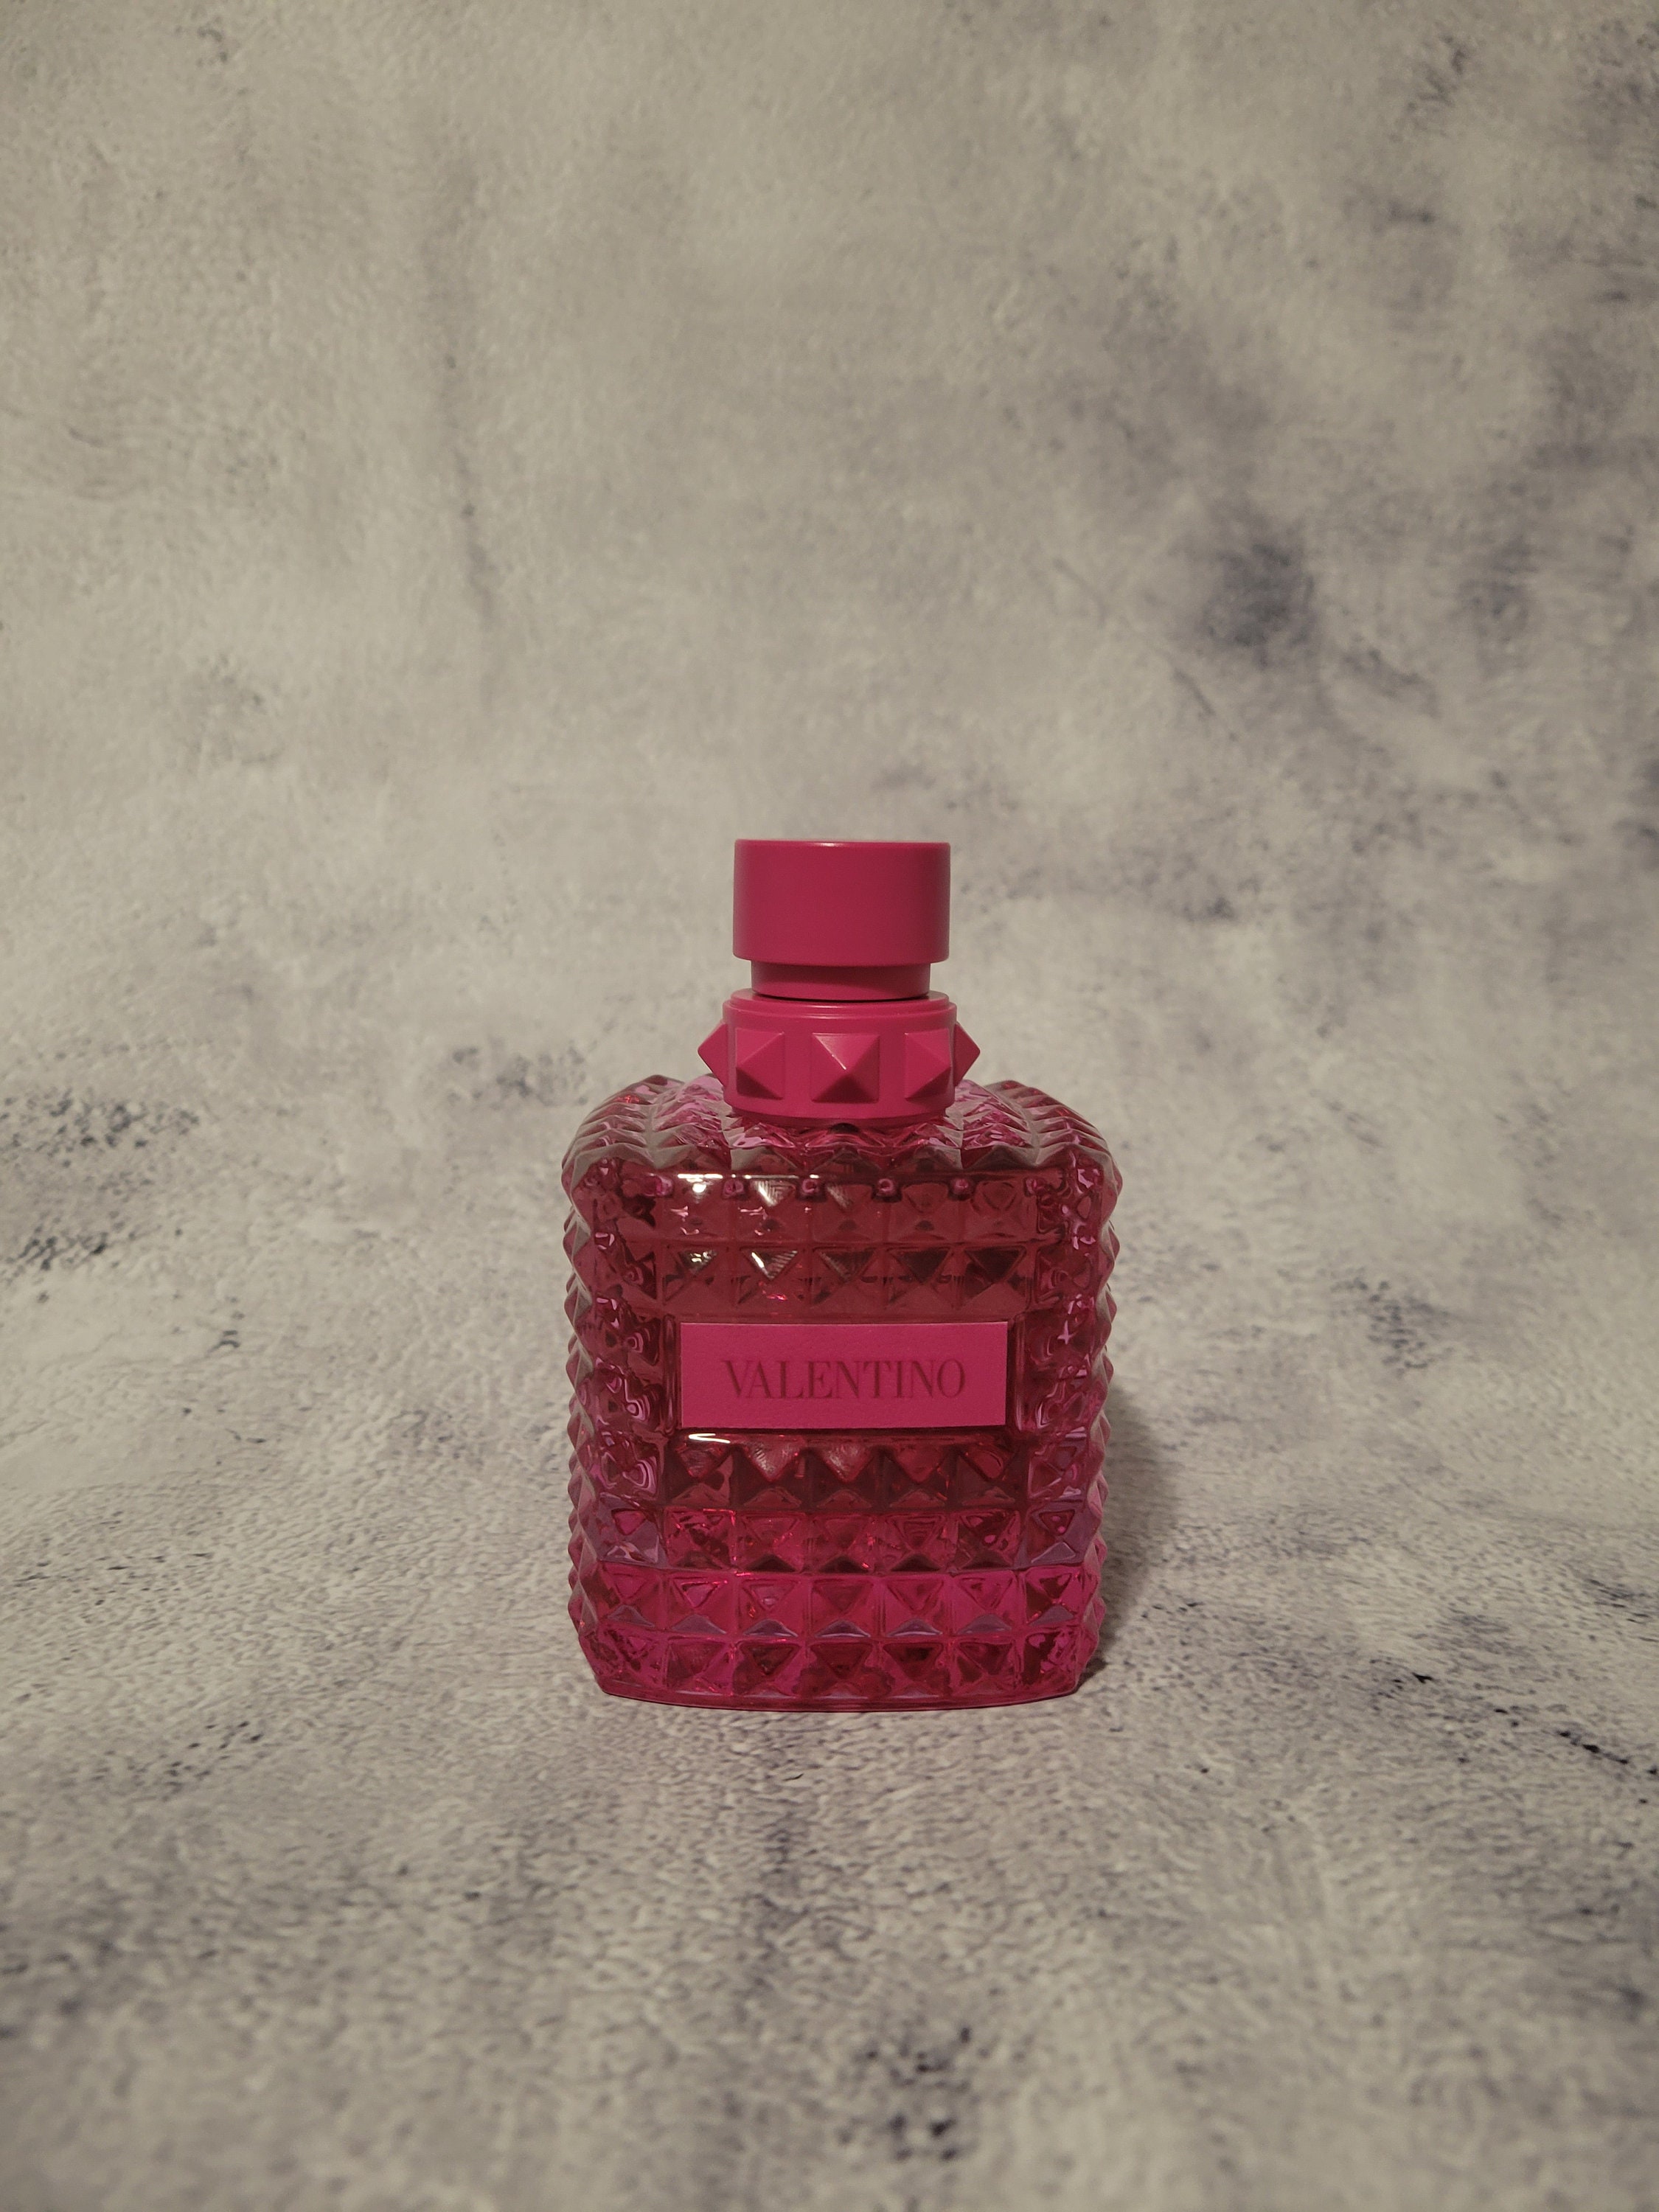 VALENTINO VALENTINA (W) EDP 80ML: Buy Online at Best Price in Egypt - Souq  is now